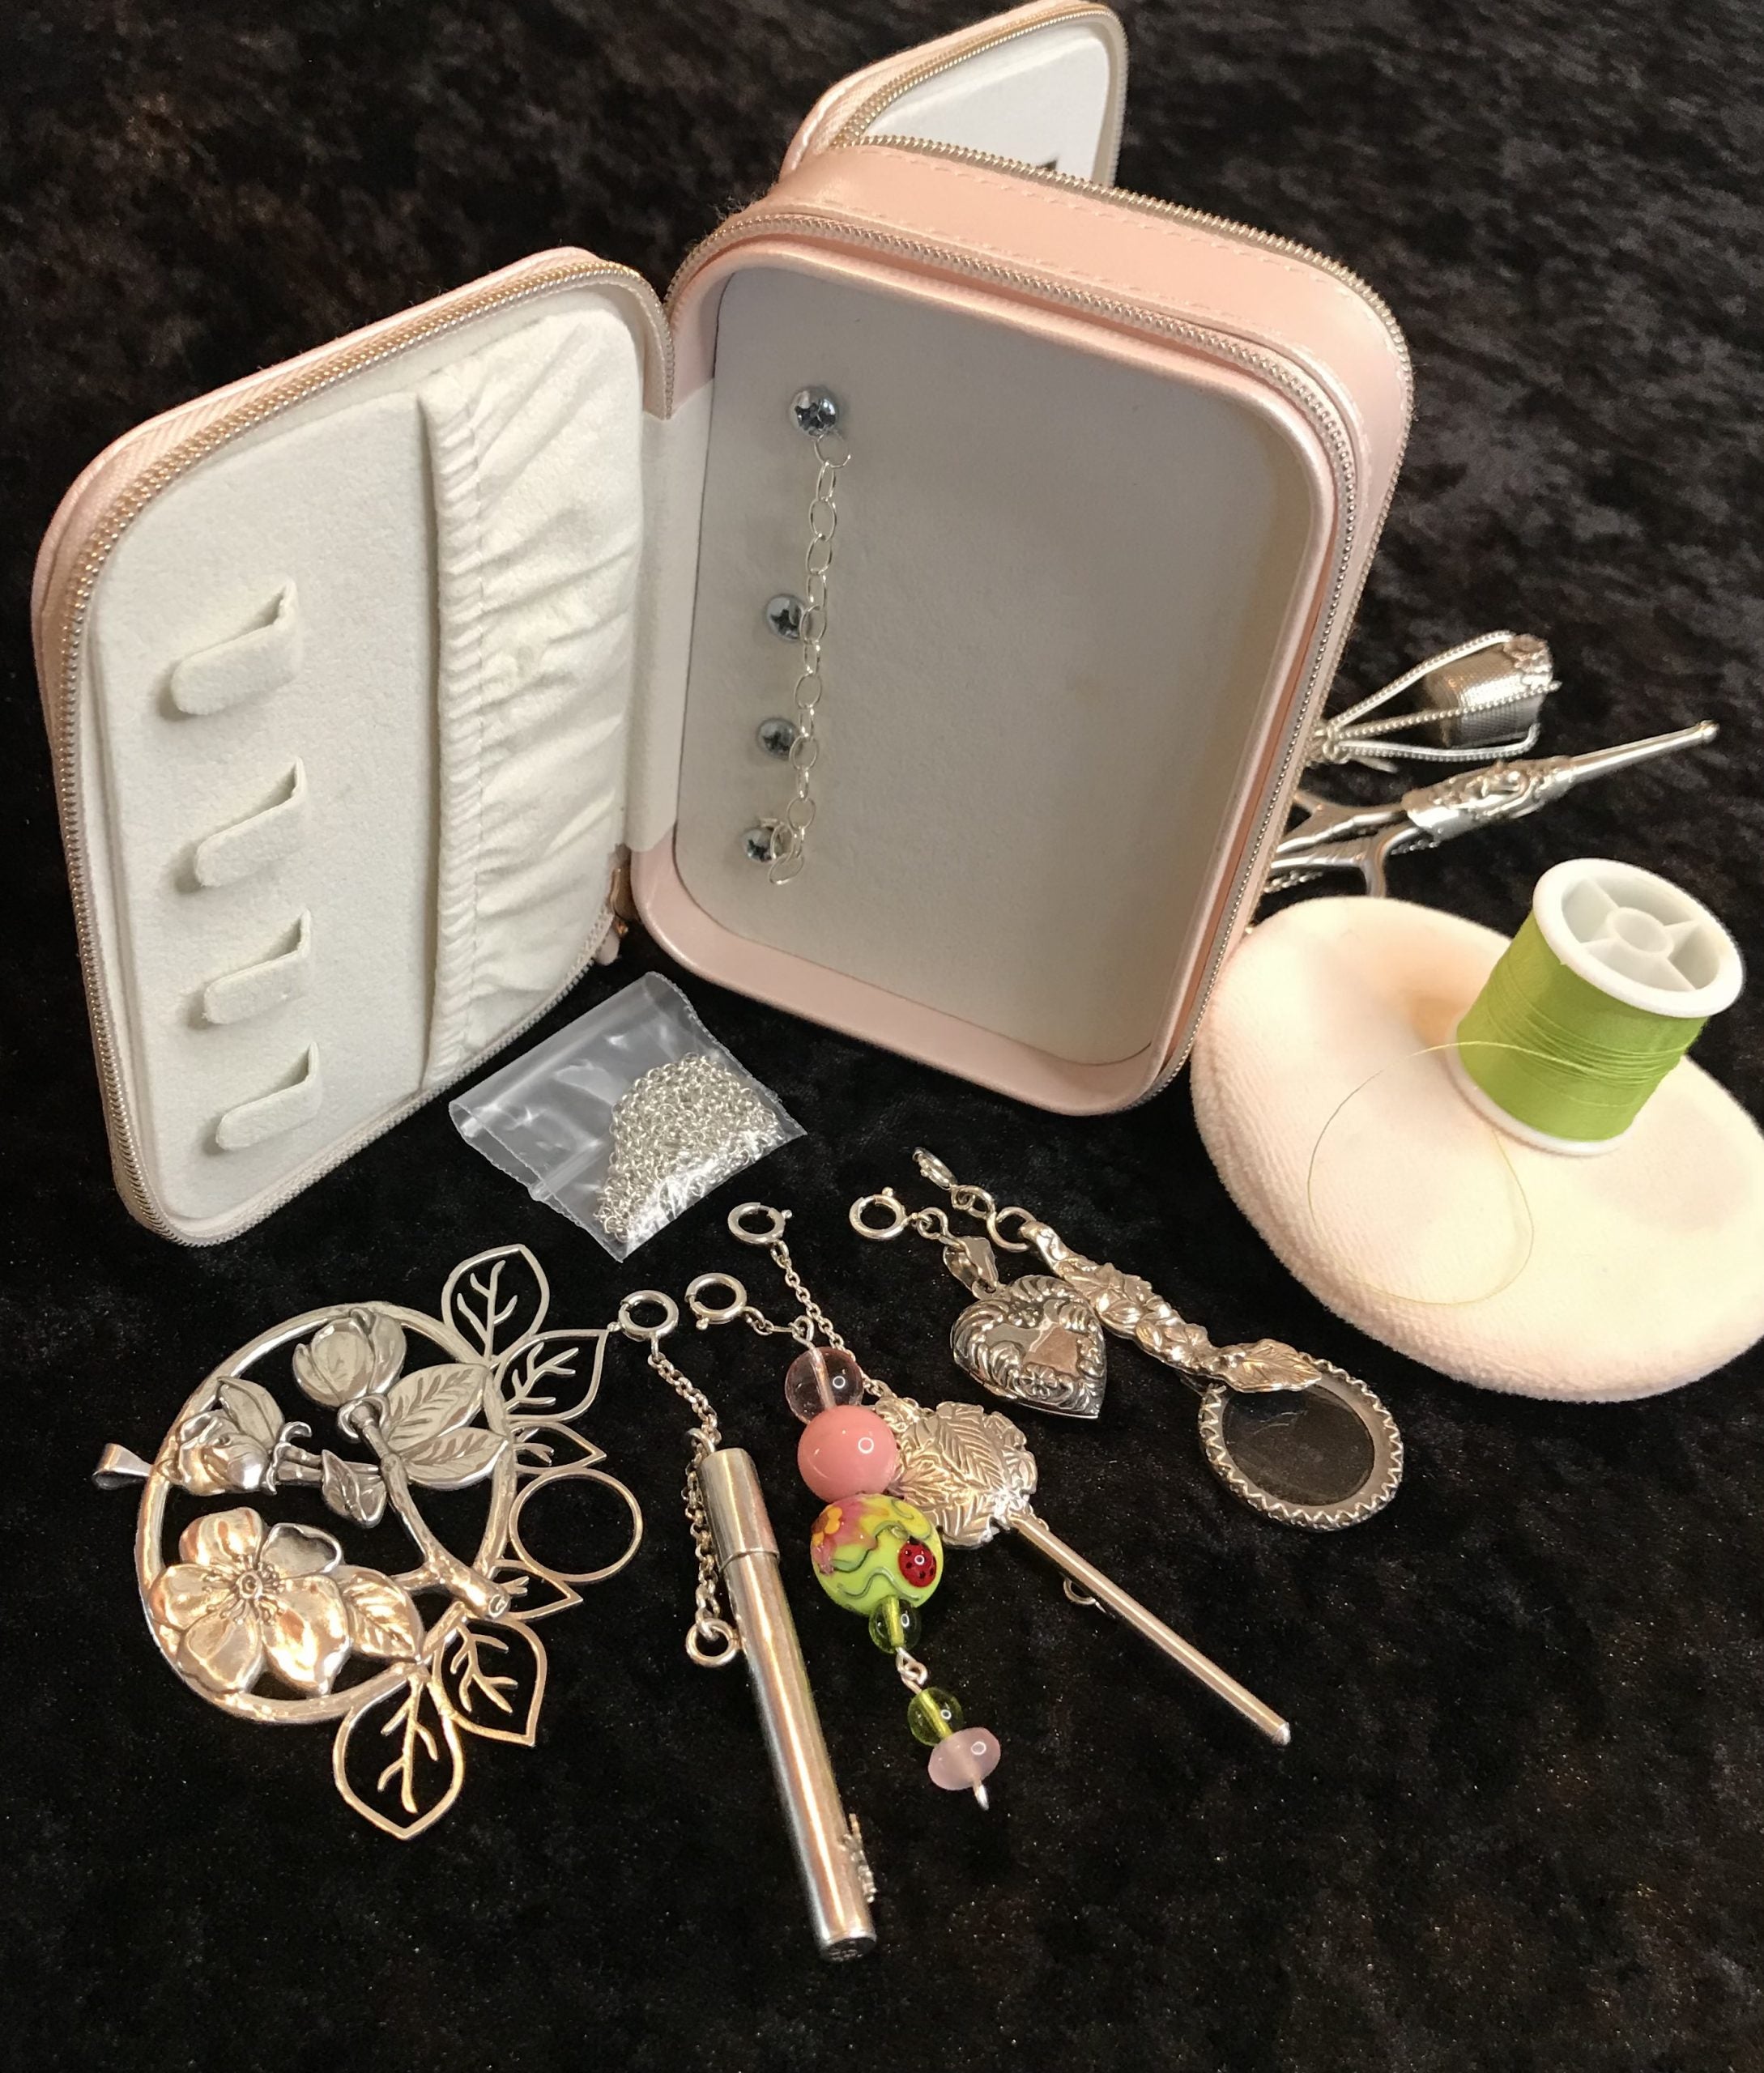 Mini travel sewing kit great for camp/ country / traveling – Classy Paci